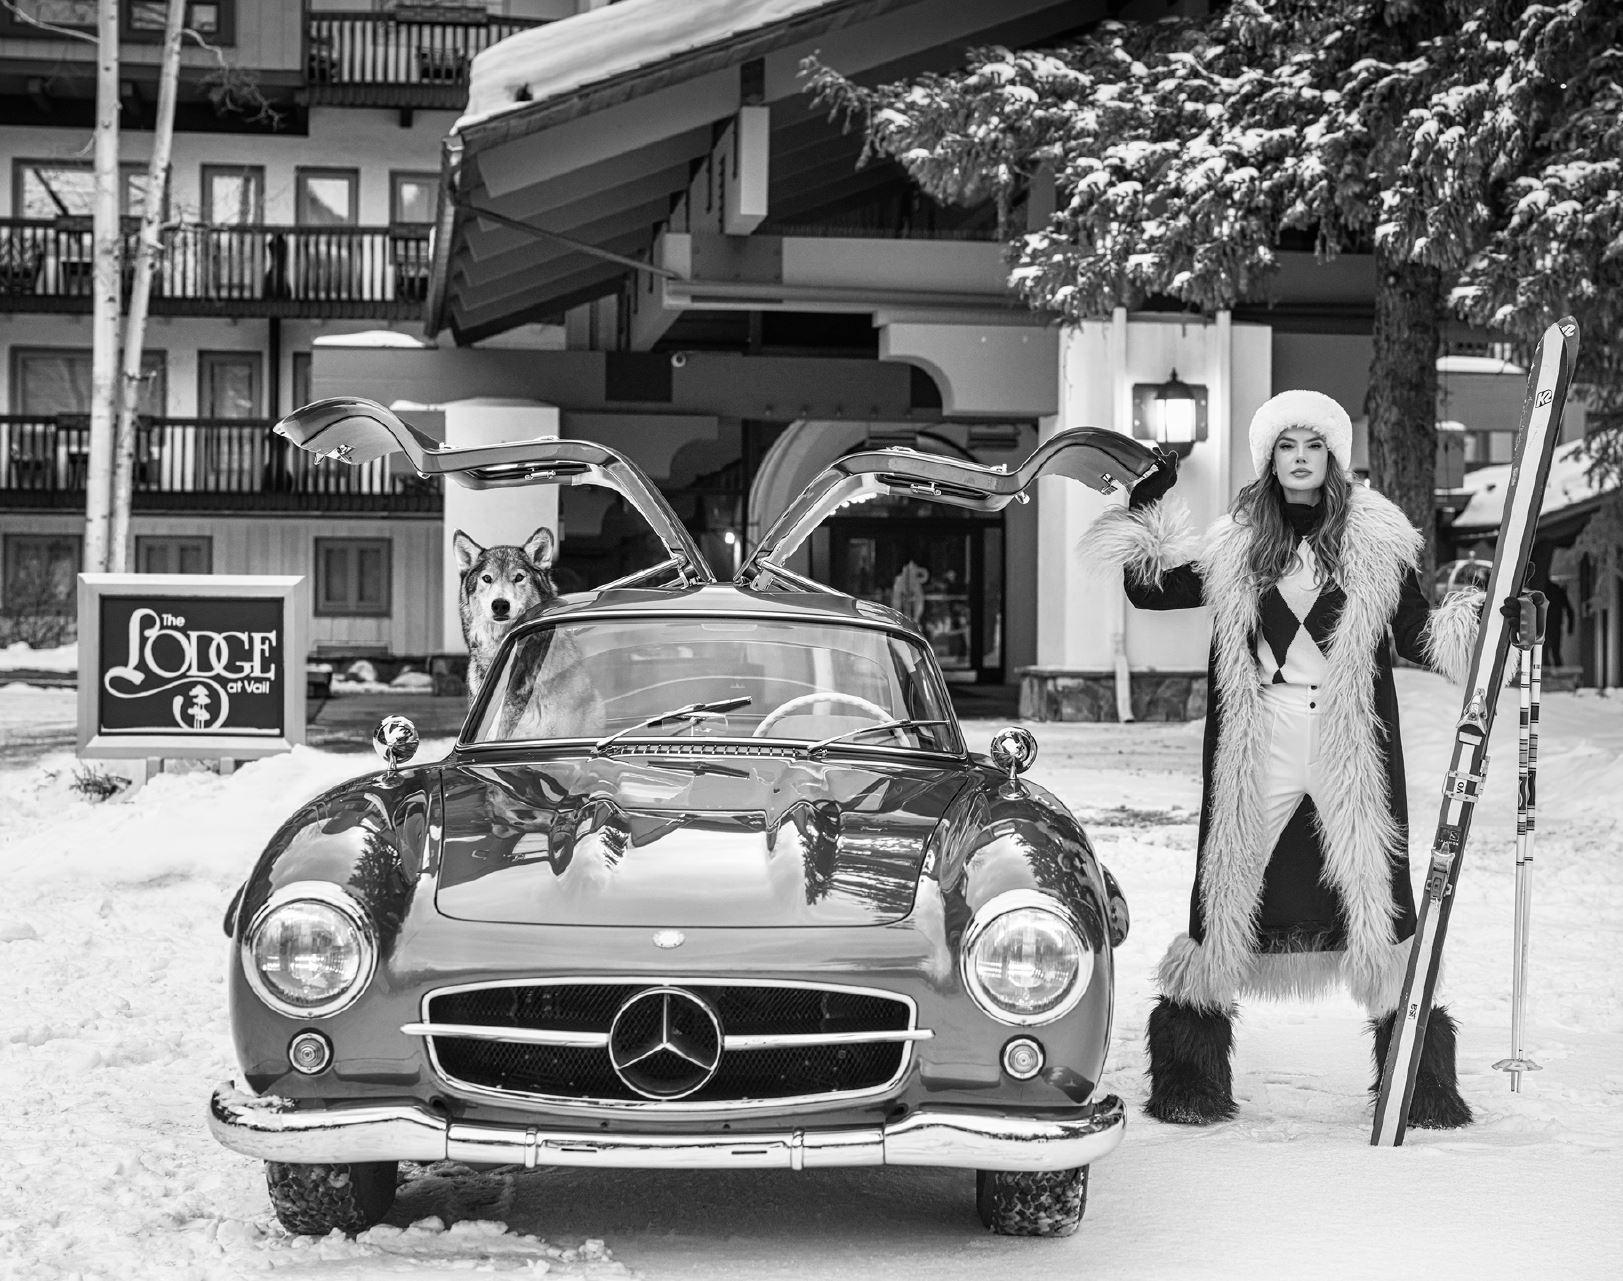 David Yarrow Figurative Photograph - The Lodge at Vail - Model and vintage Mercedes, fine art photography, 2024